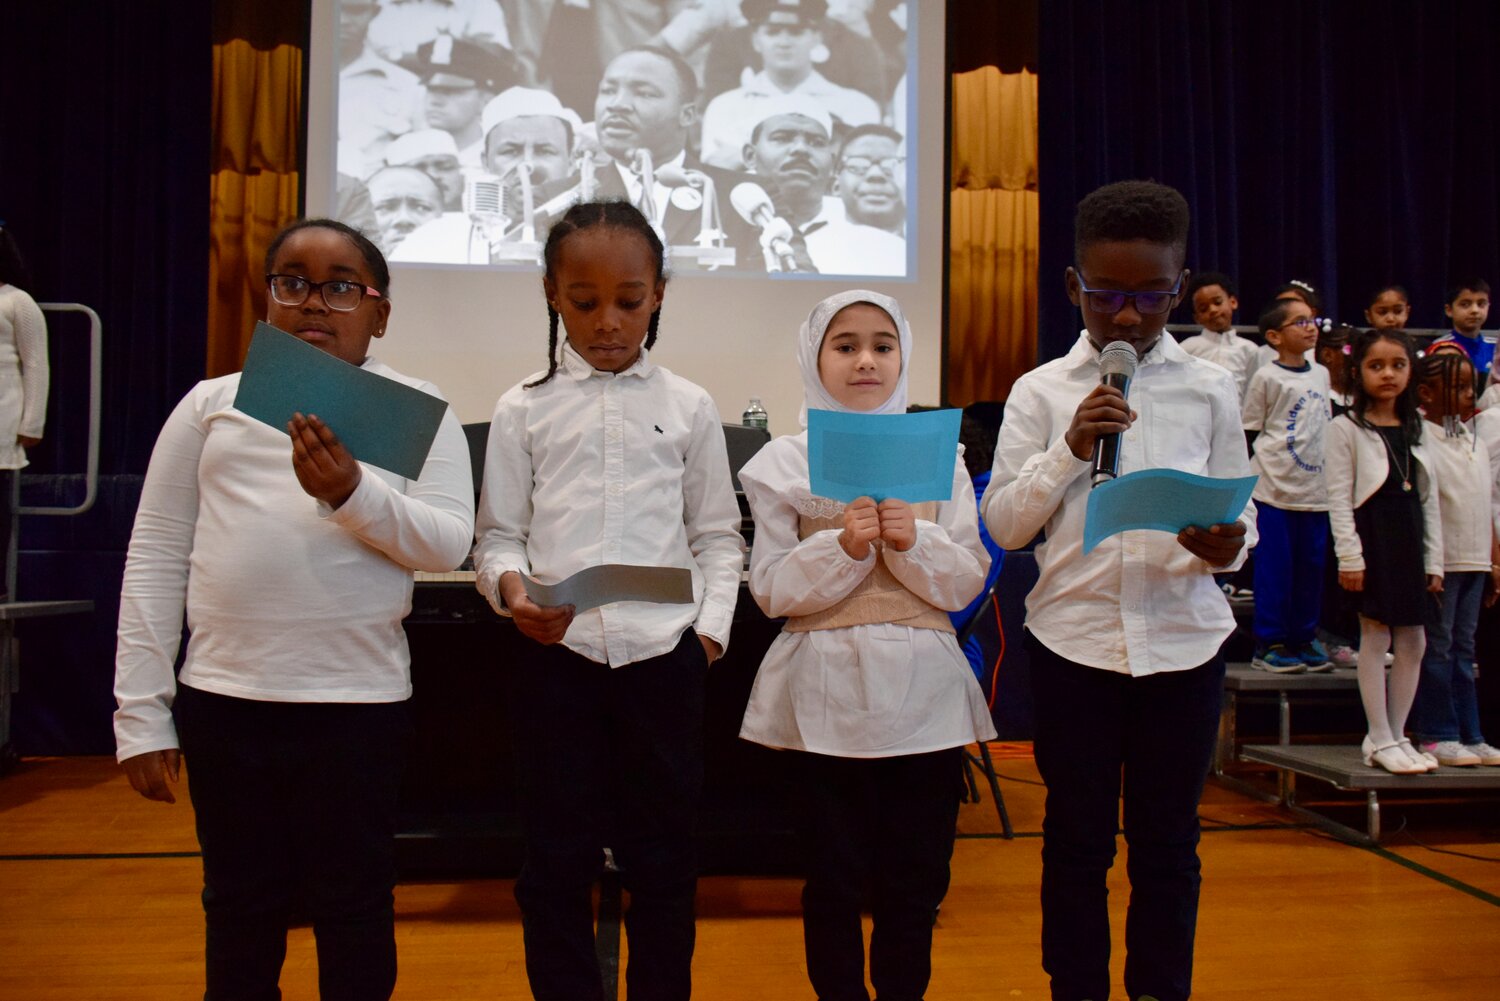 Students at Alden Terrace School in Elmont pay tribute to Martin Luther King Jr. during an assembly through song, poetry and presentations on Jan. 12.